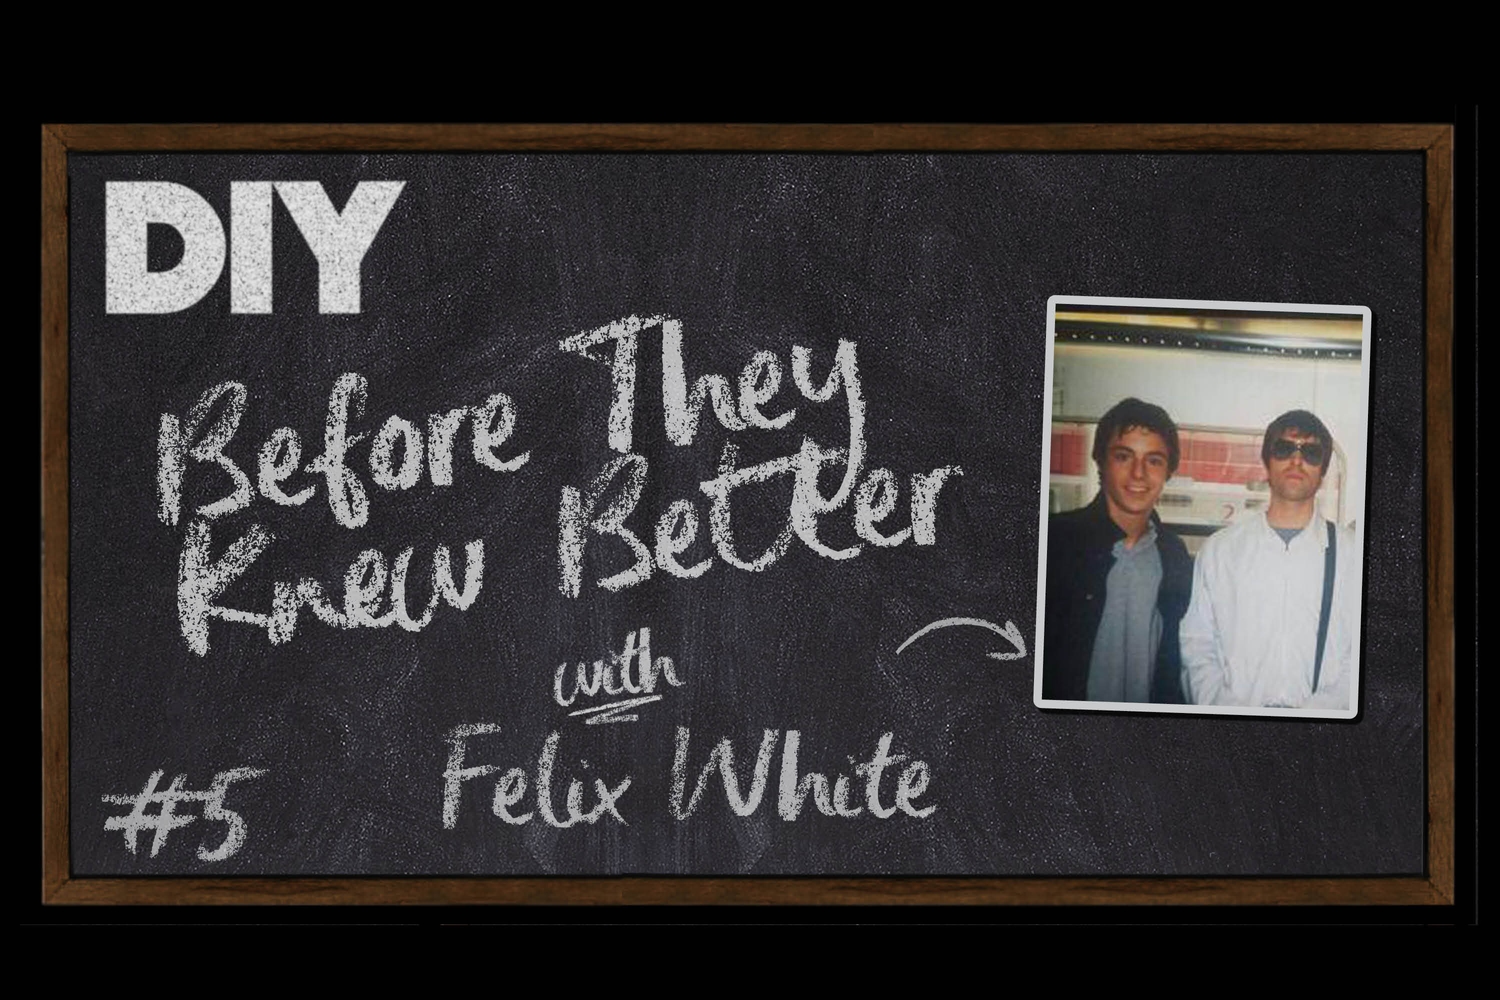 The Maccabees’ Felix White is the latest guest on DIY’s podcast Before They Knew Better